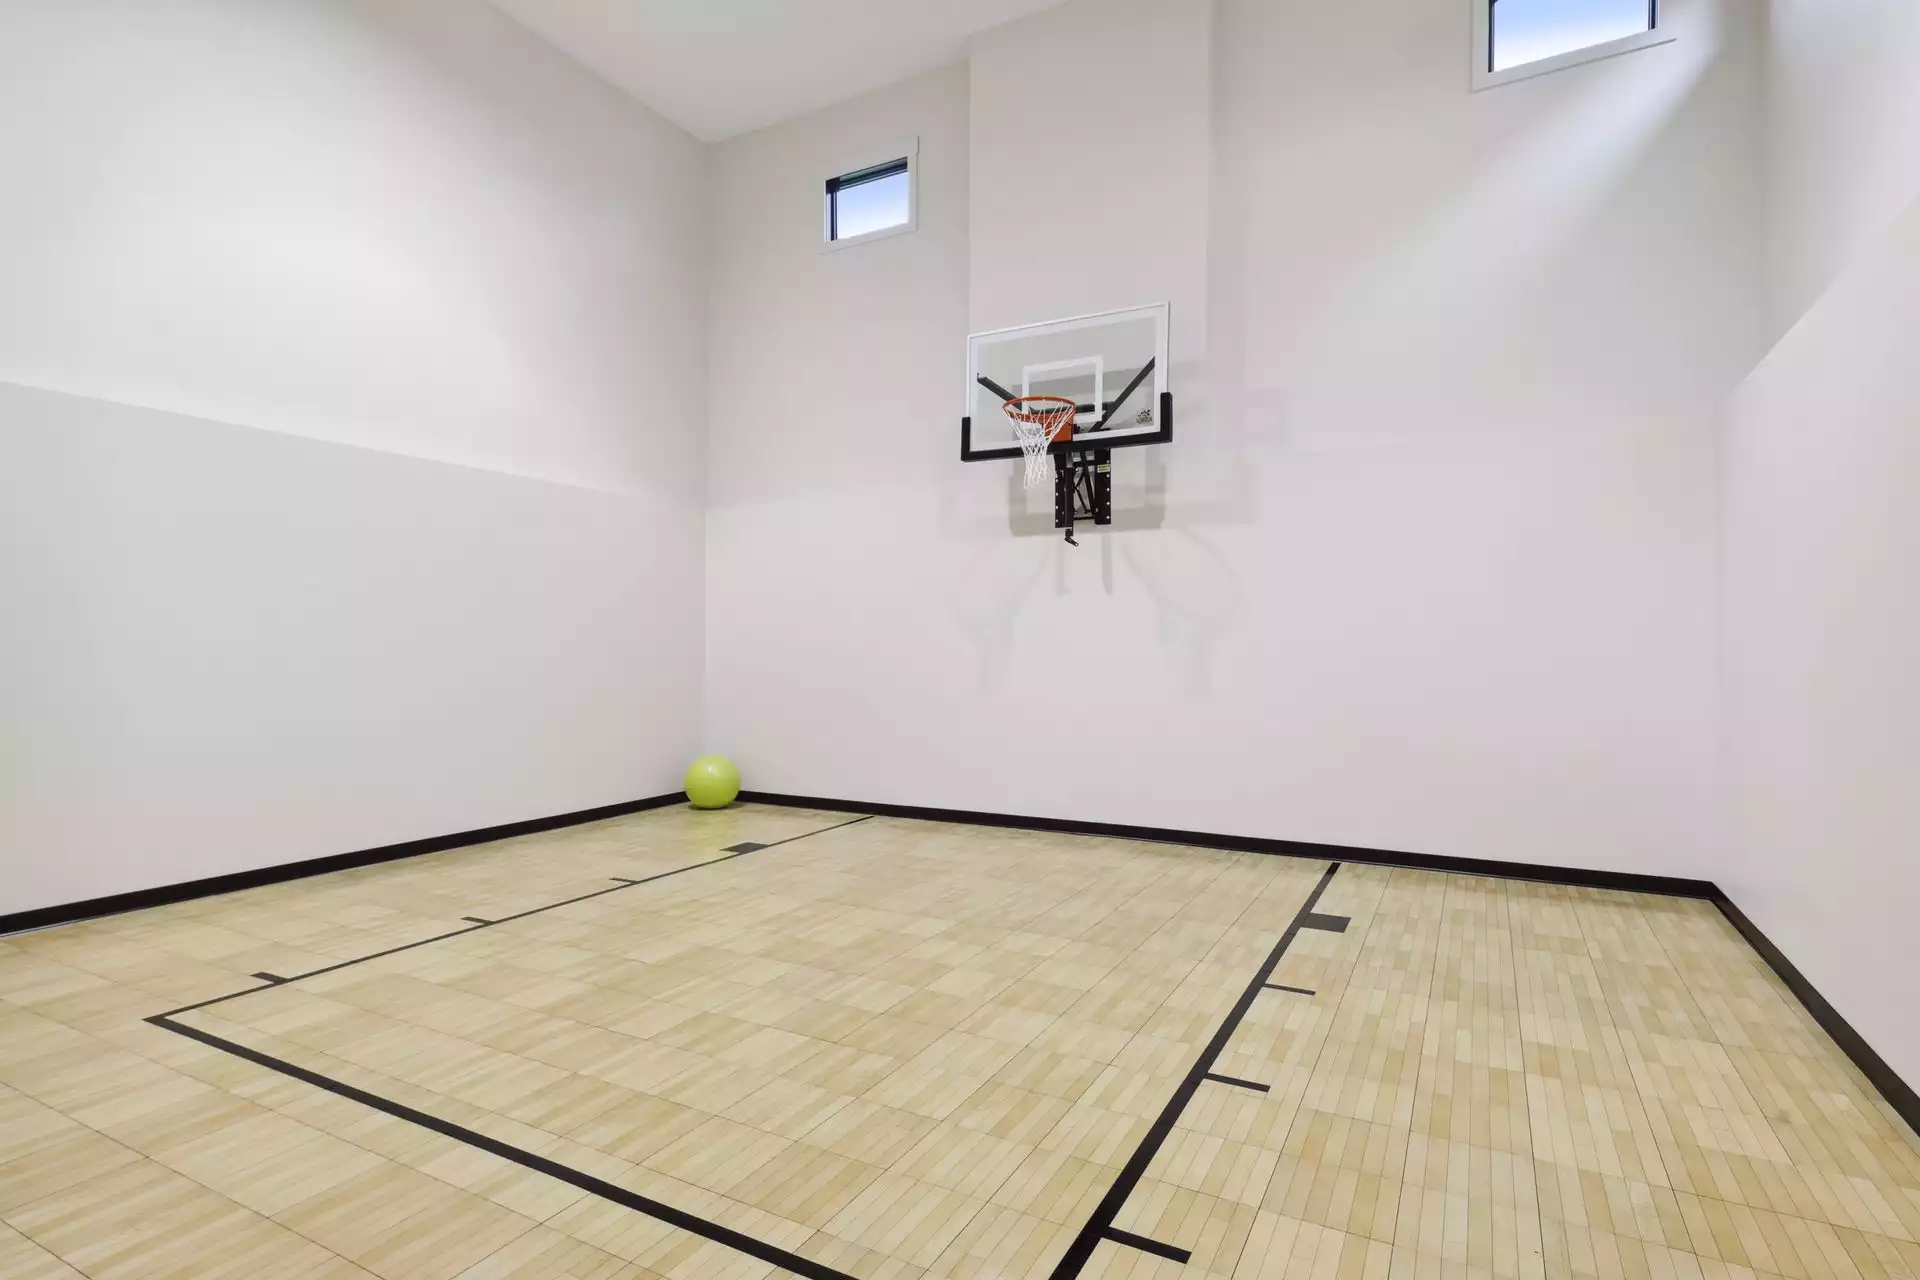 Would you like to have an Indoor Sports Room®?